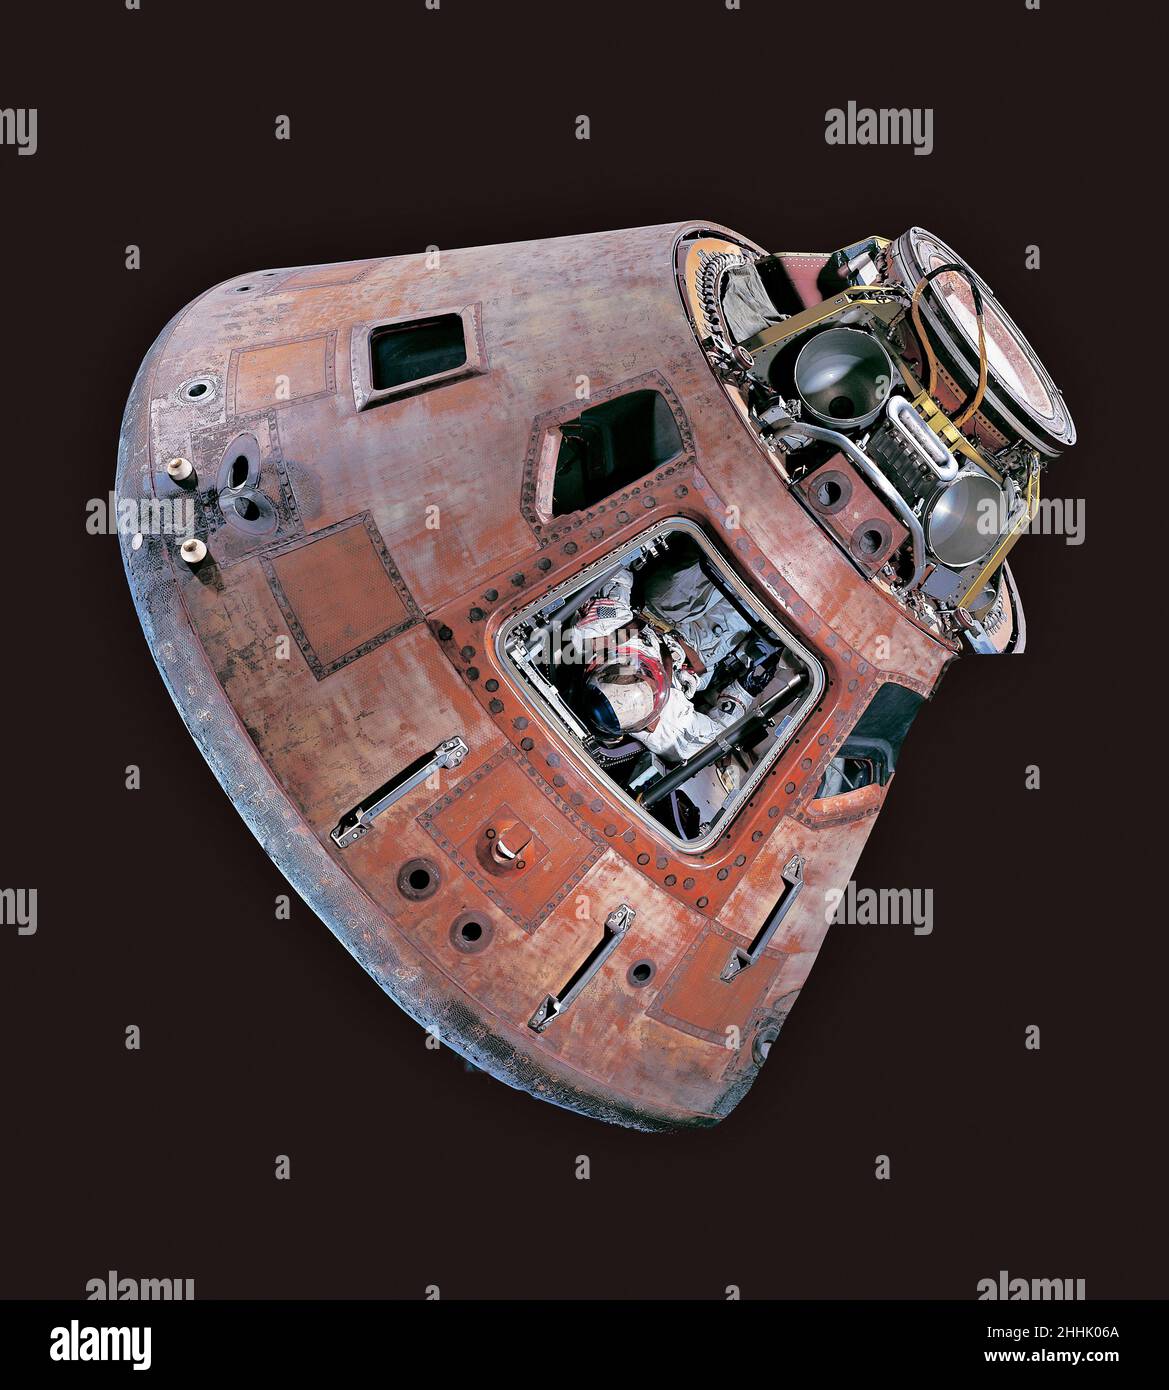 The Apollo 11 Command Module, 'Columbia,  living quarters for the three-person crew during most of the first crewed lunar landing mission in July 1969 Stock Photo